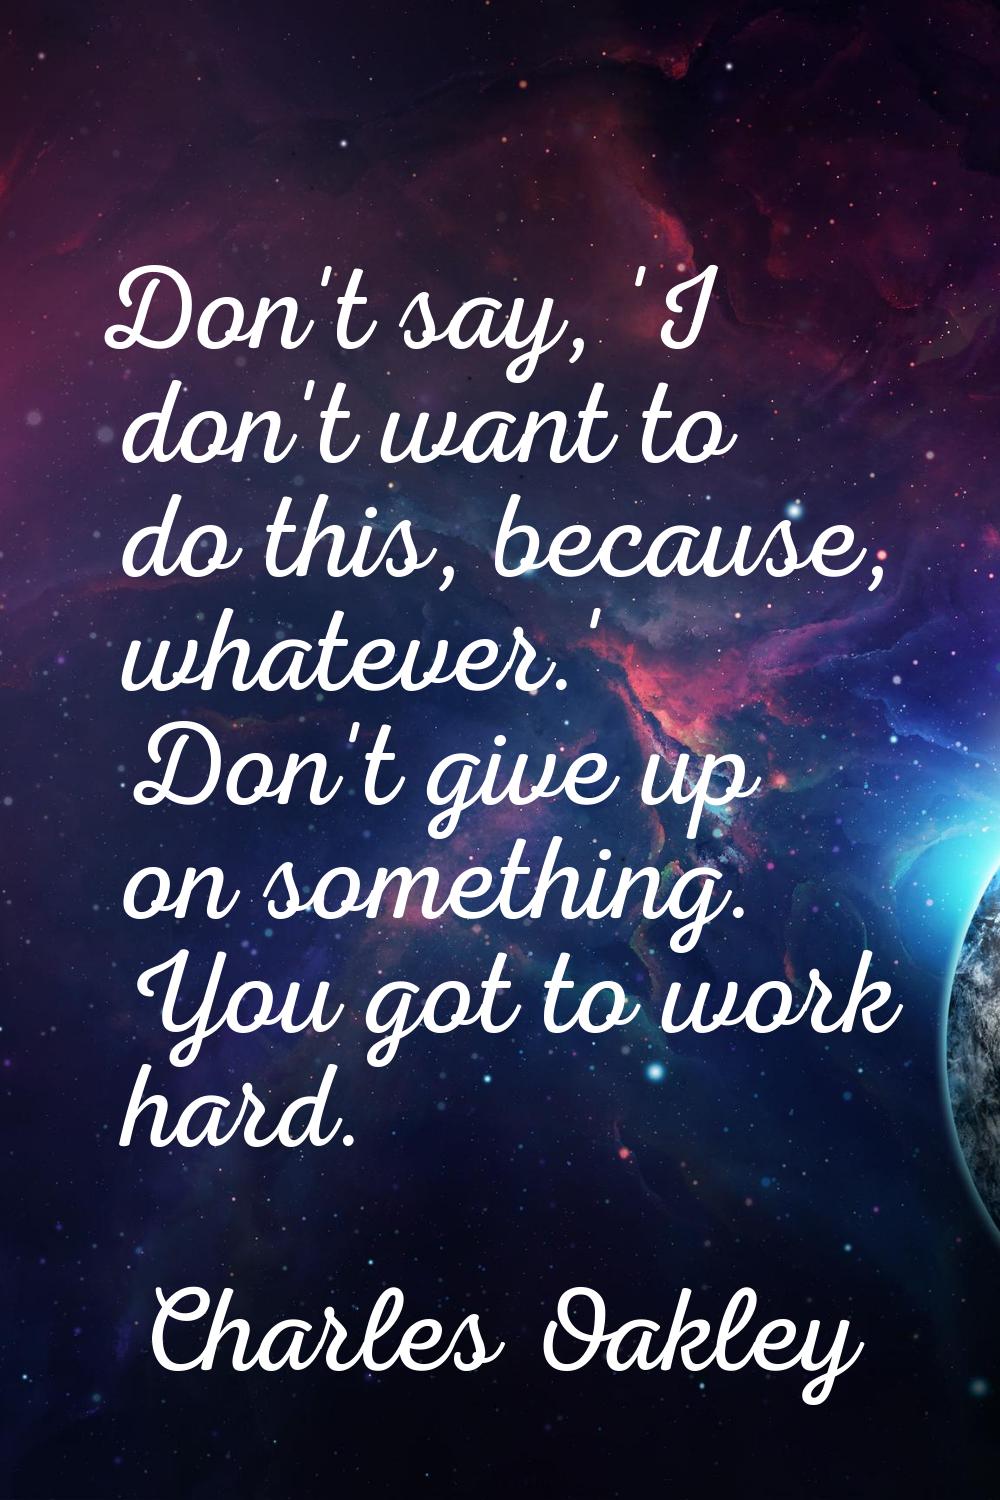 Don't say, 'I don't want to do this, because, whatever.' Don't give up on something. You got to wor